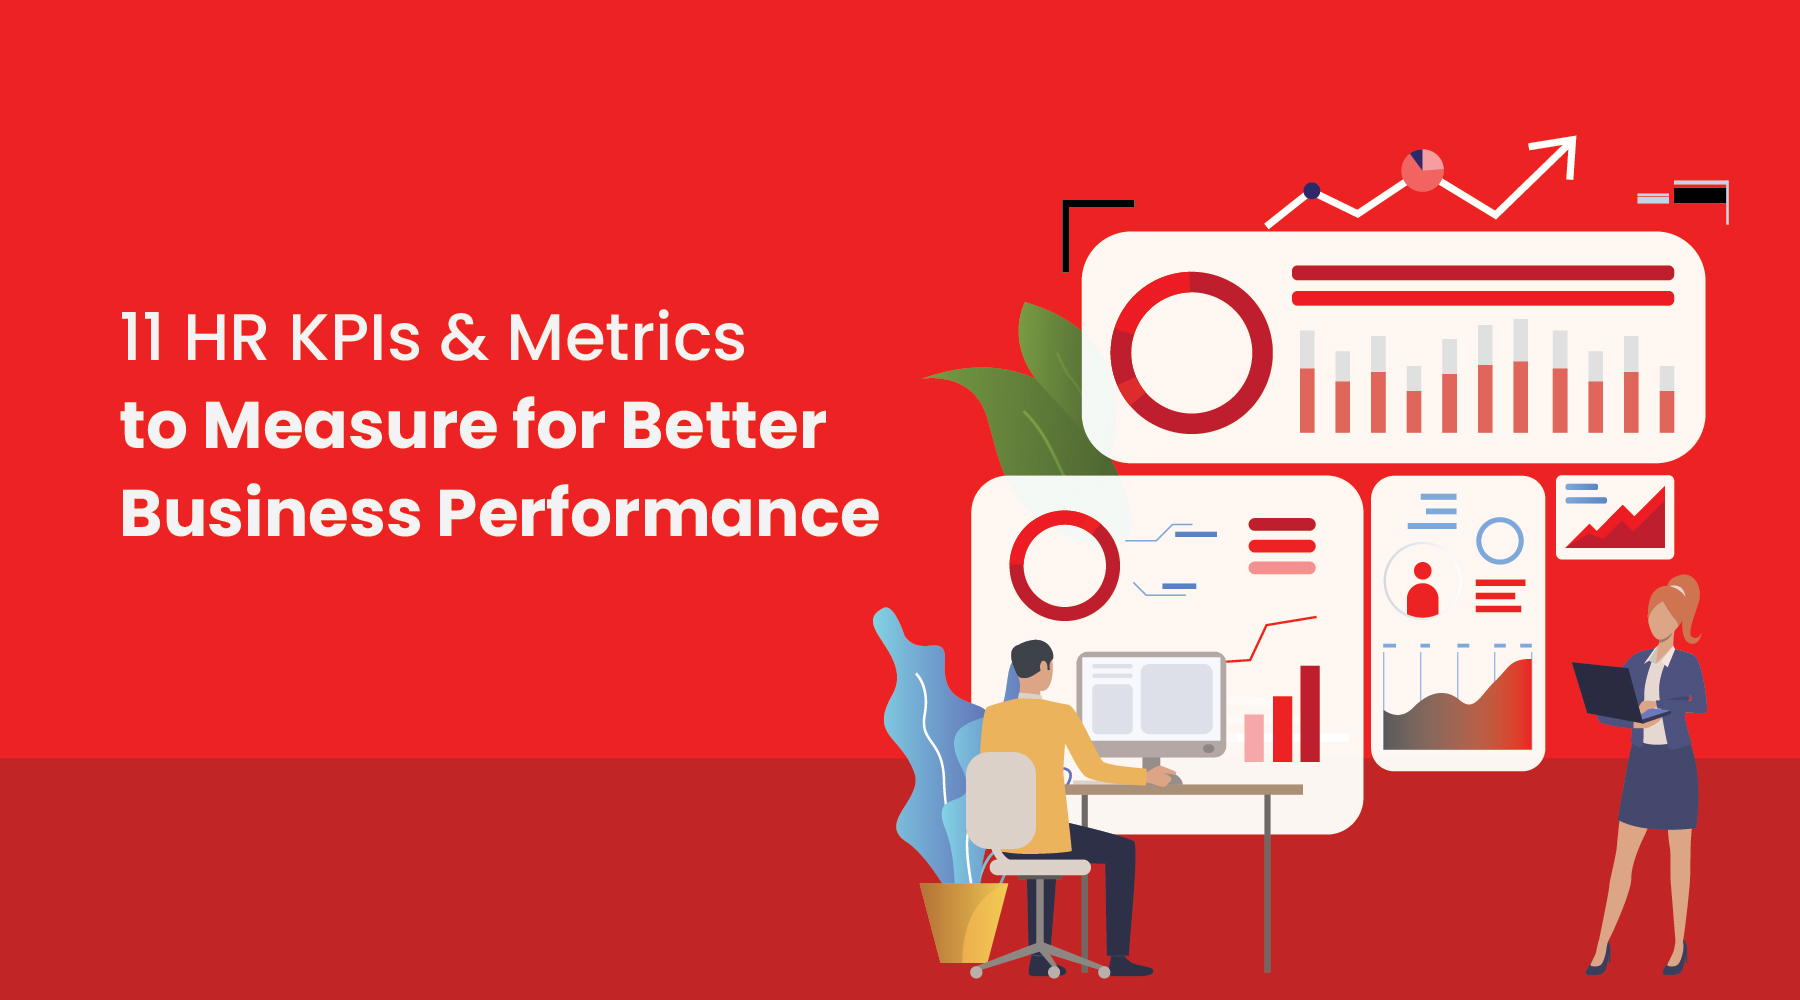 11 HR kpis and metrics for Better Business Performance